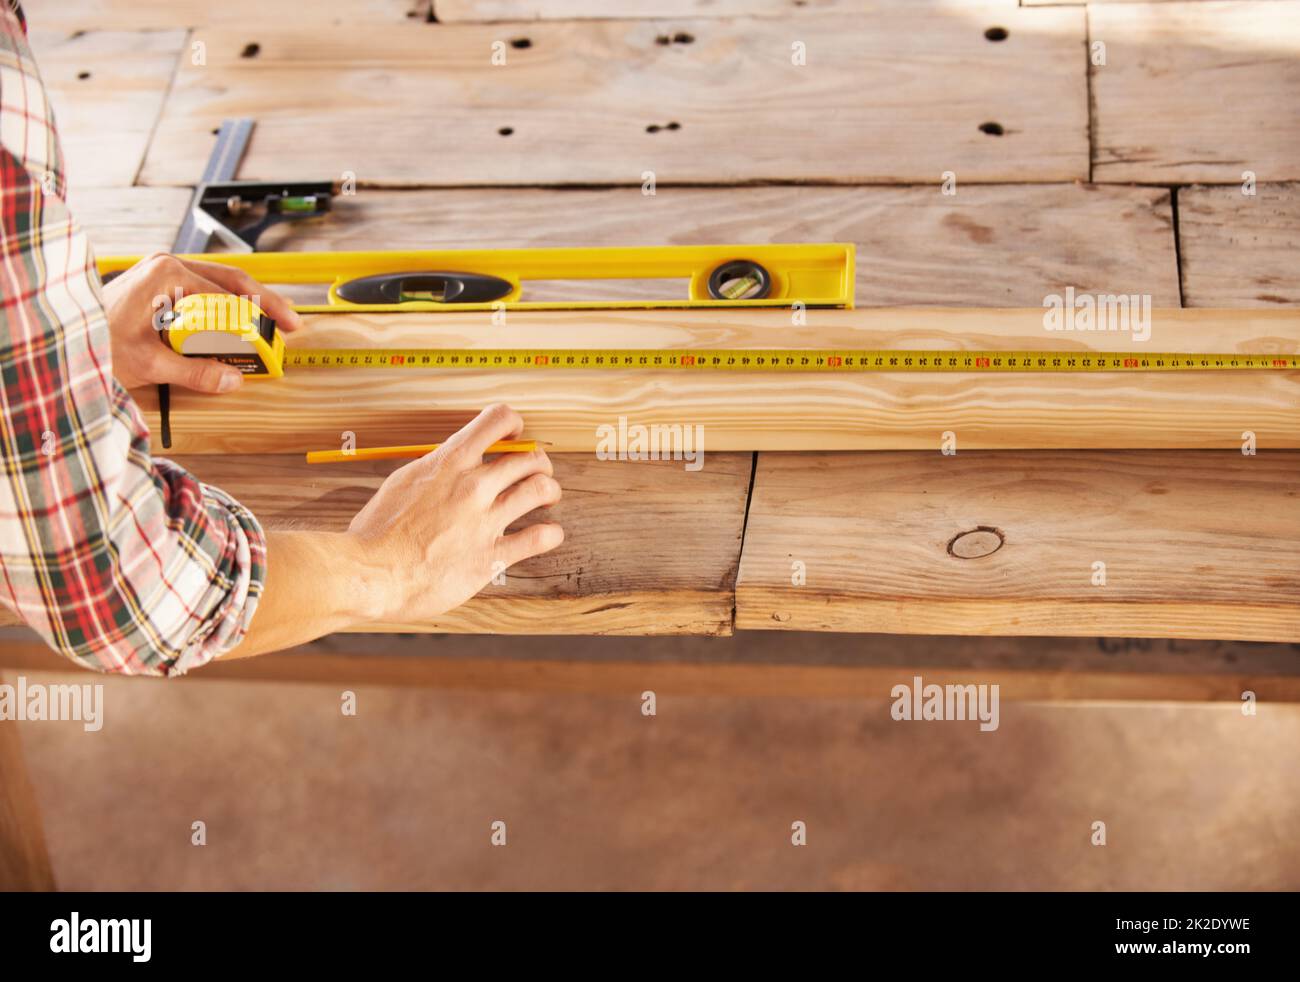 Double checking his measurements. A handyman getting his measurements just perfect with a spirit level and measuring tape. Stock Photo